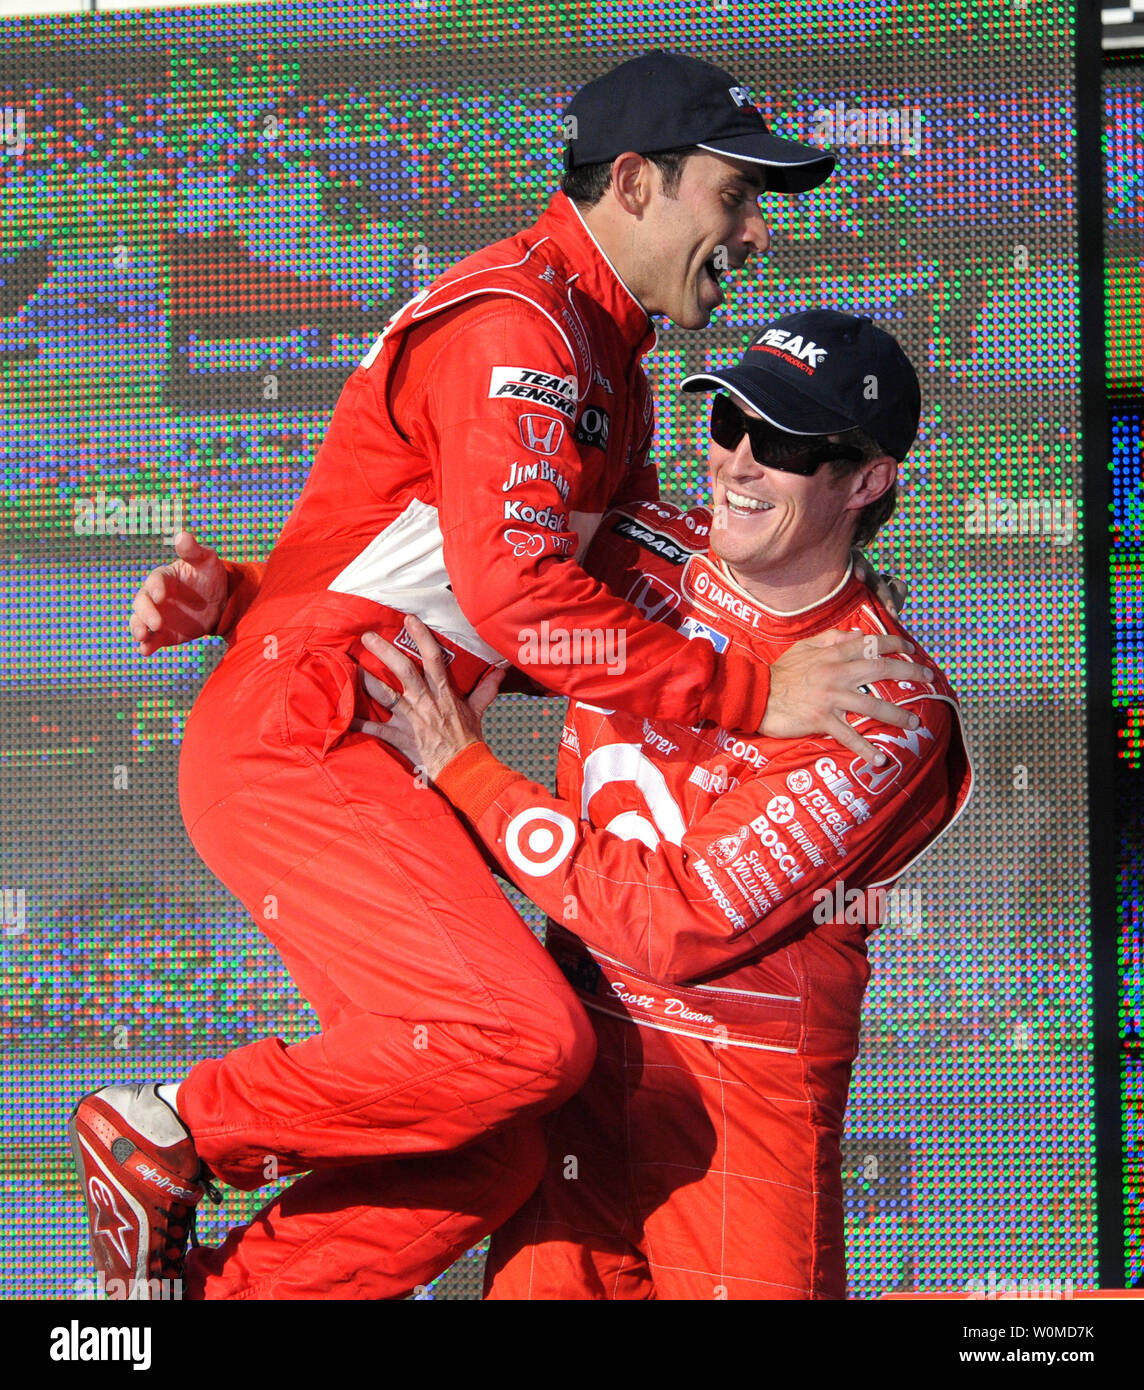 Two time Indianapolis 500 winner Helio Castroneves (L), seen with teammate Ryan Briscoe in the winners circle at the Chicagoland Speedway in Joliet, Illinois on September 7, 2008, was indicted by a grand jury on six separate counts of income tax evasion for tax years 1999 through 2004 and conspiracy to defraud the U.S. government of income taxes on October 2, 2008. (UPI Photo/Darrell Hoemann/Files) Stock Photo